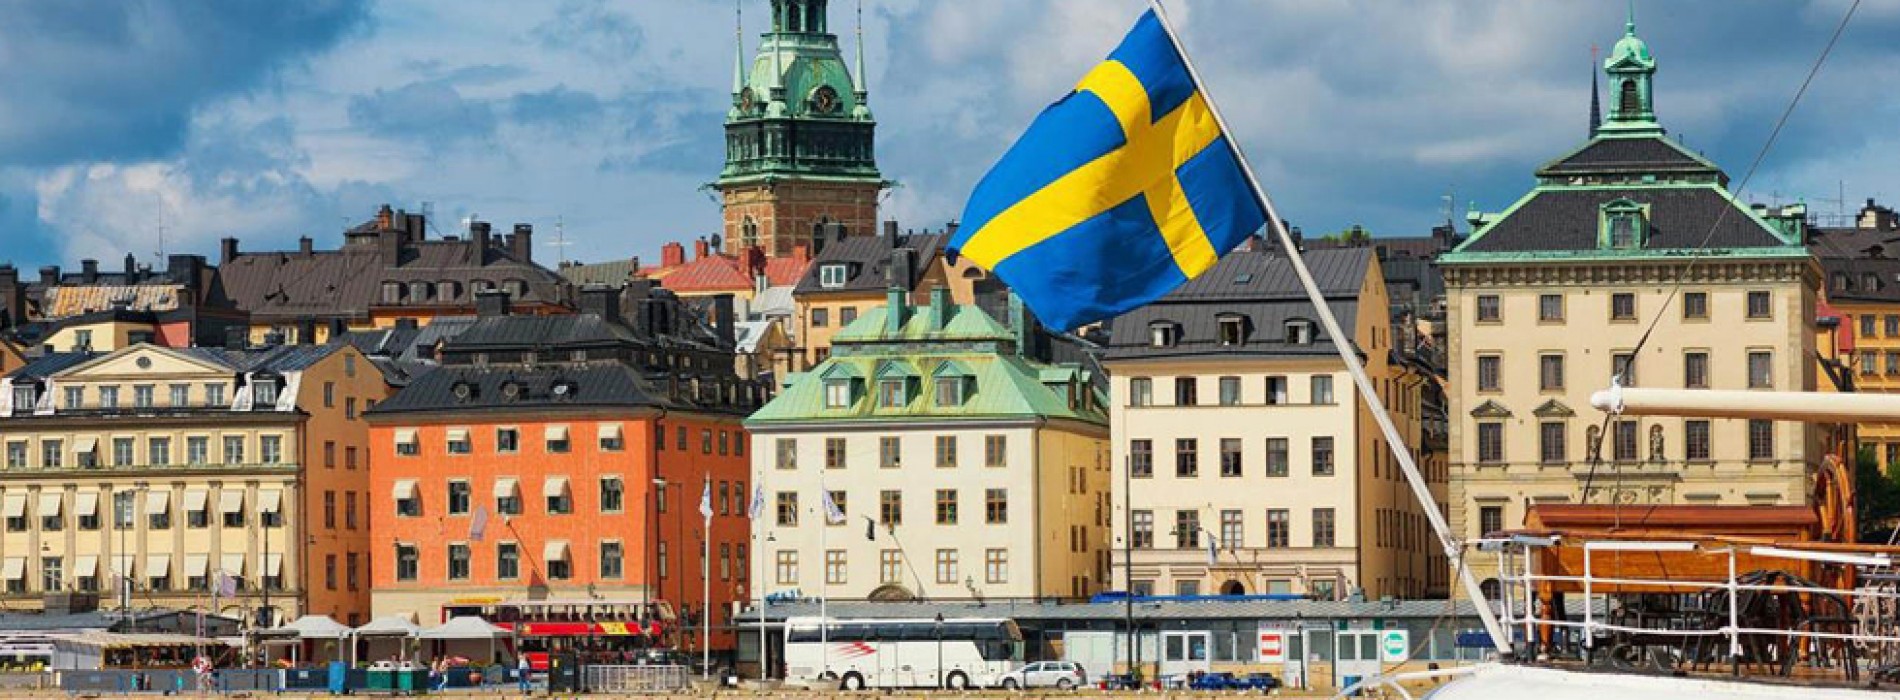 Sweden publishes open letter inviting lovers, haters and hesitators to its capital